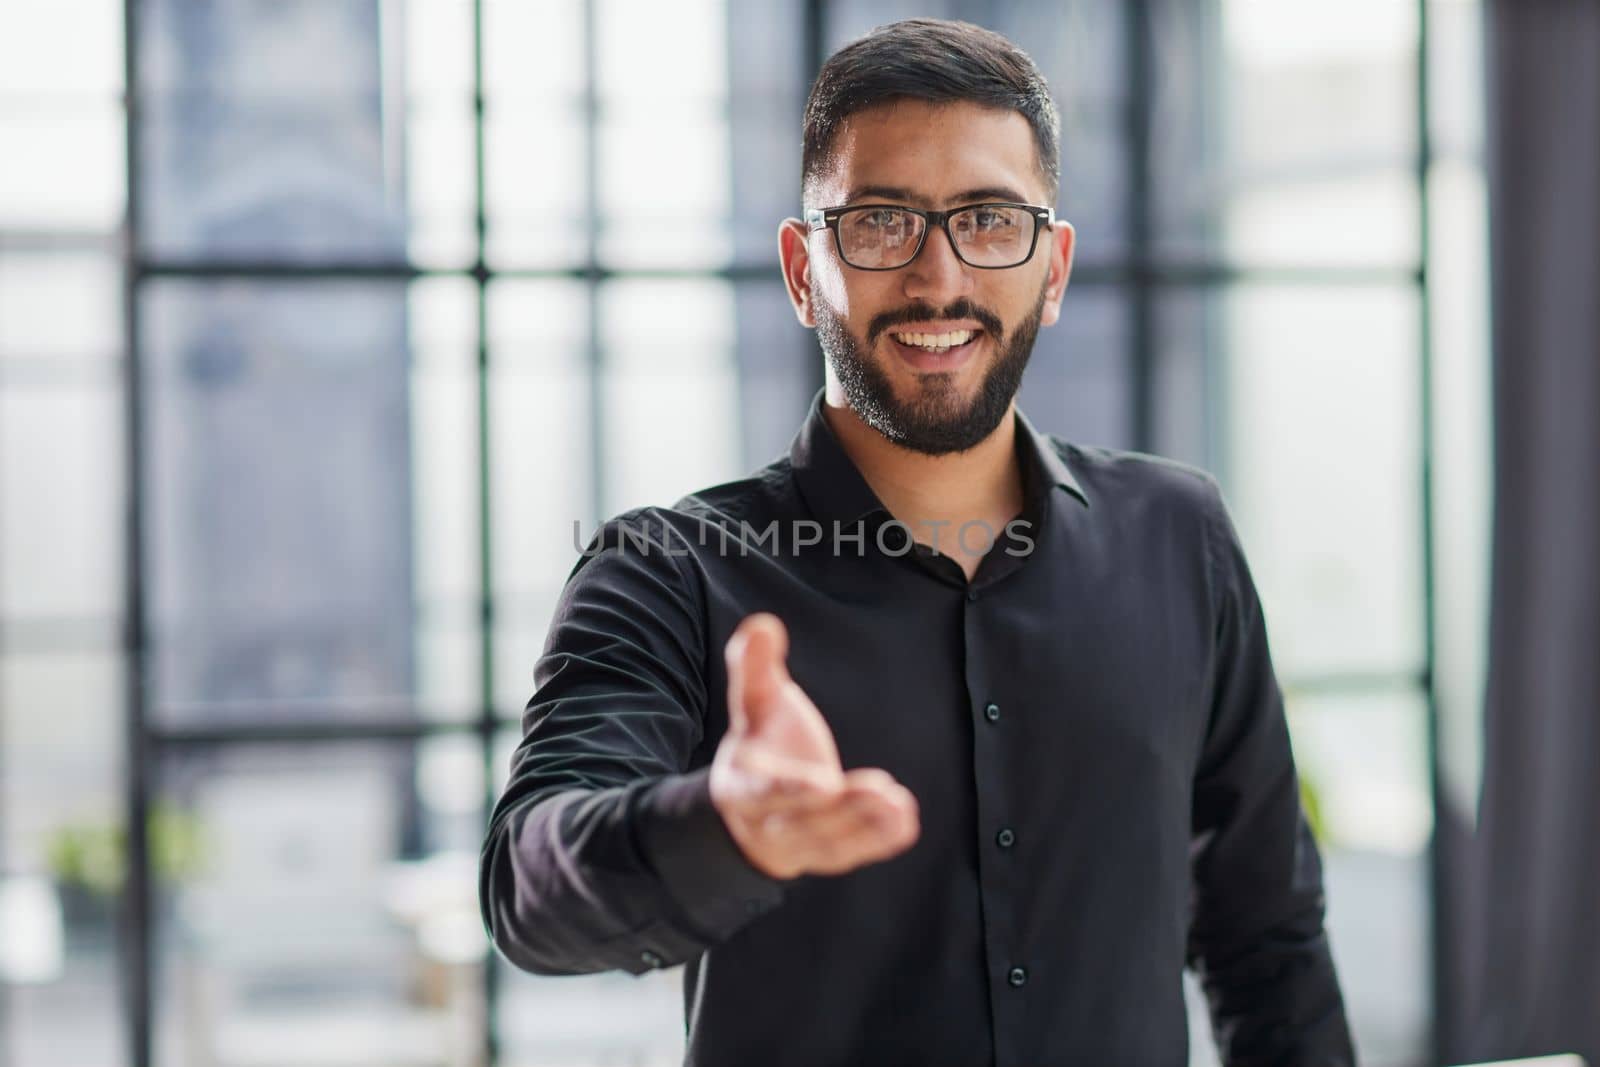 smiling businessman reaching out for a handshake